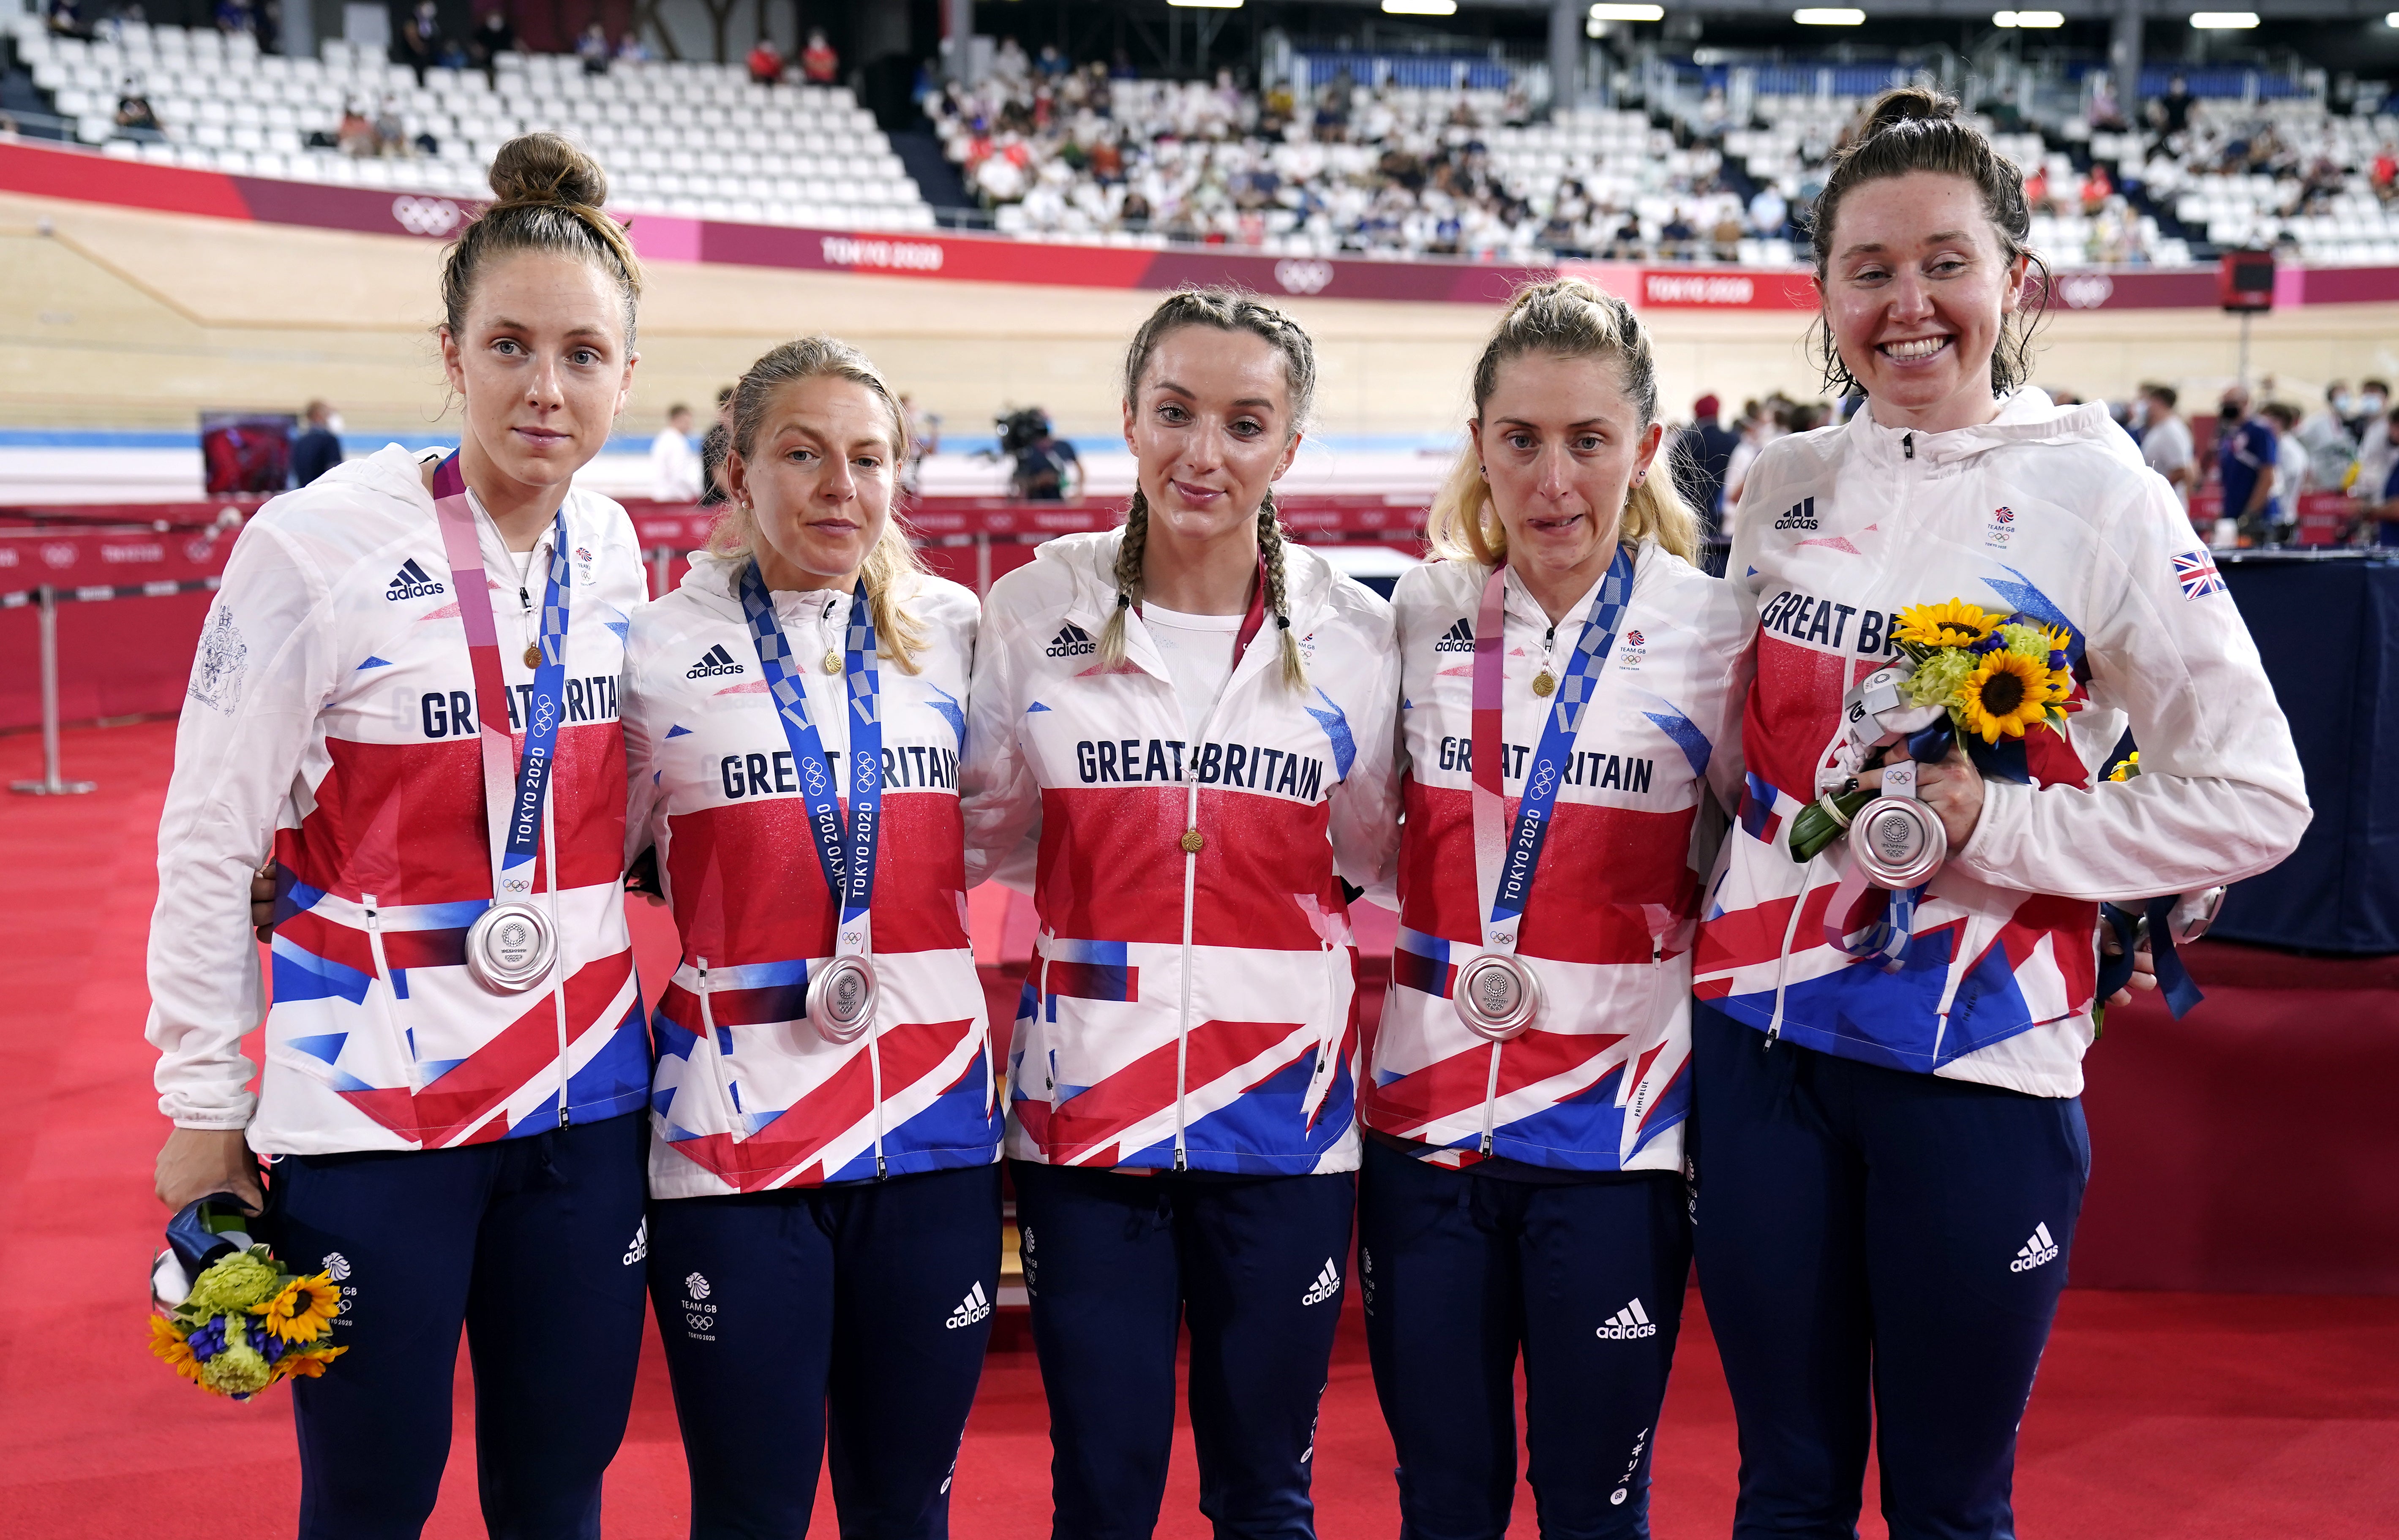 Katie Archibald, Laura Kenny, Neah Evans, Josie Knight and Elinor Barker had to settle for silver (Danny Lawson/PA)